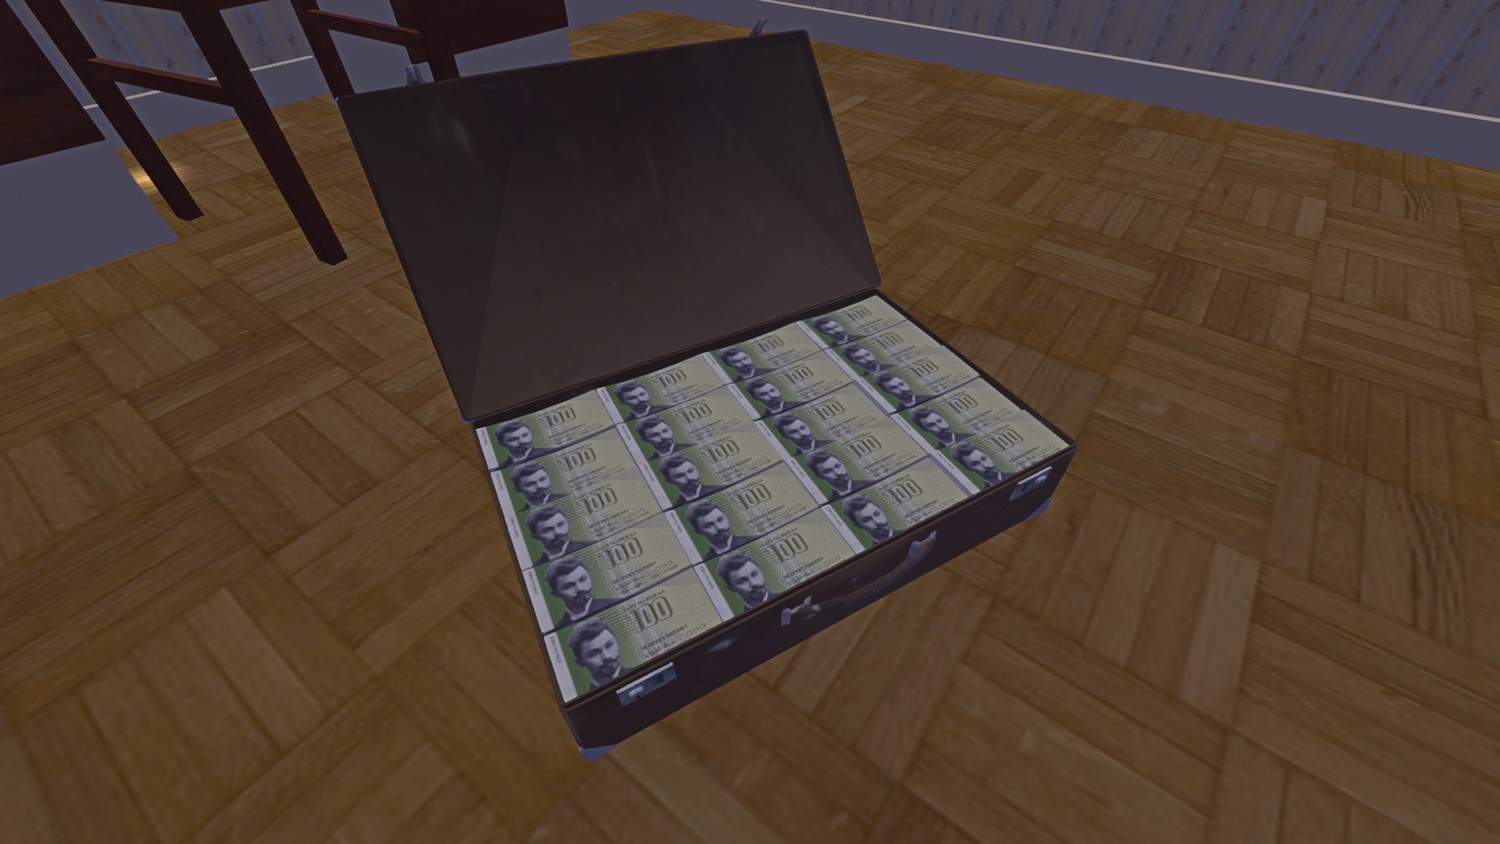 My Summer Car: Savegame (White Satsuma, Case with money, a lot of beer and food)